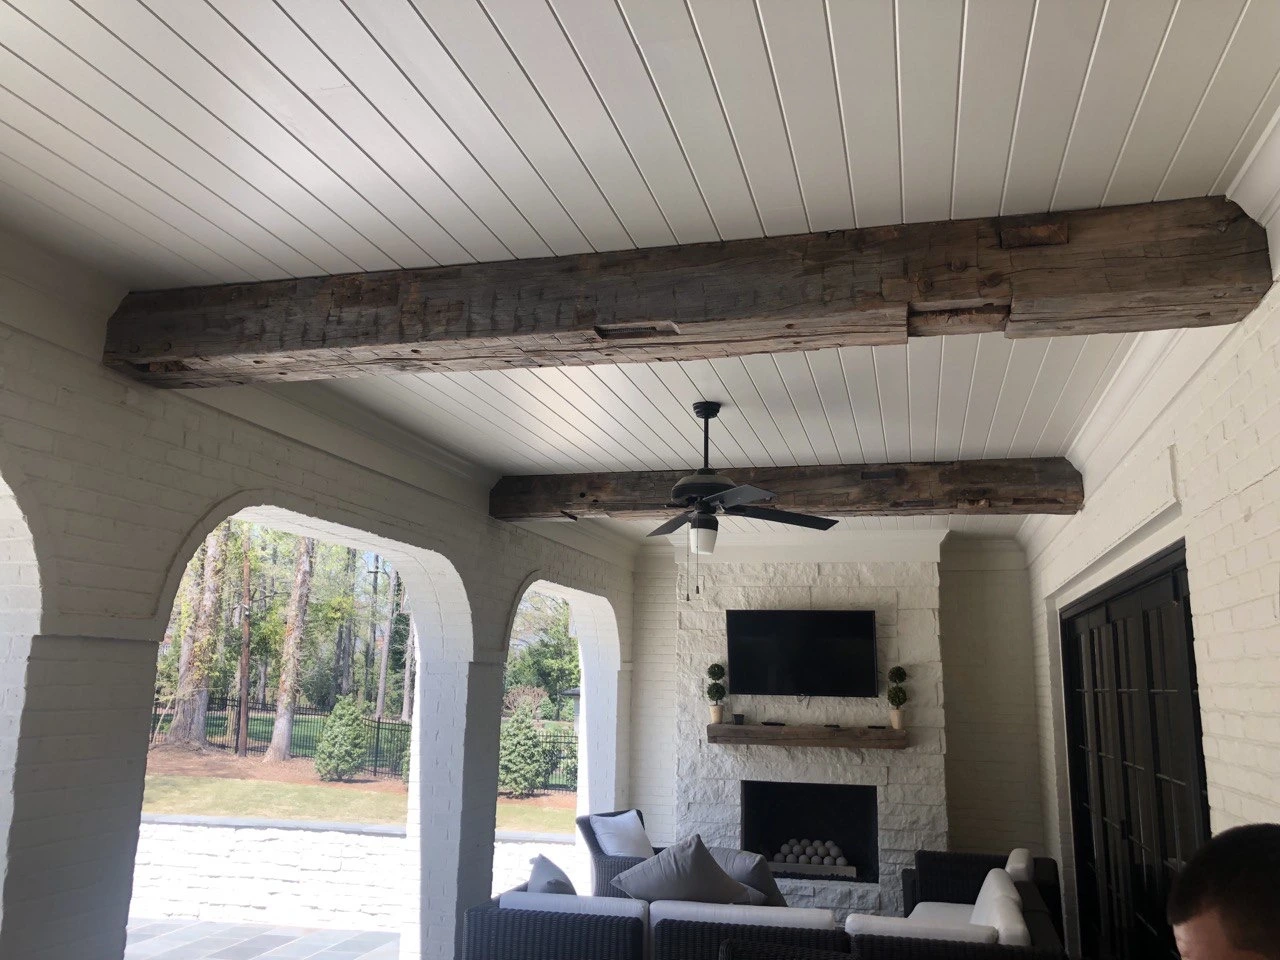 A living room with wood beams on the roof